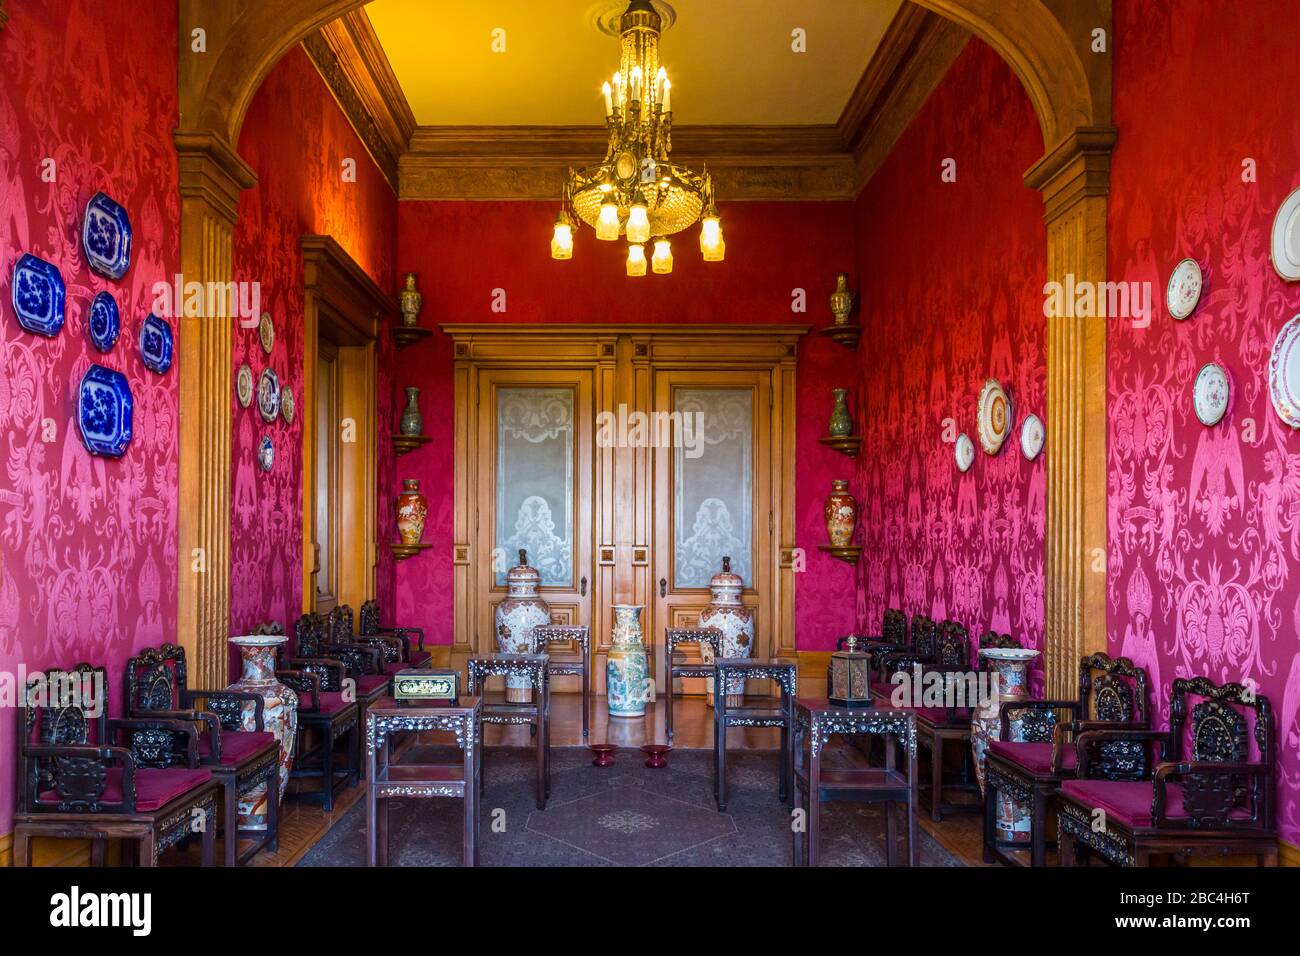 Ornate interior room at Chapultepec Castle, now National Museum of History in Mexico City, once home to Emperor Maximilian I and Mexican Presidents. Stock Photo